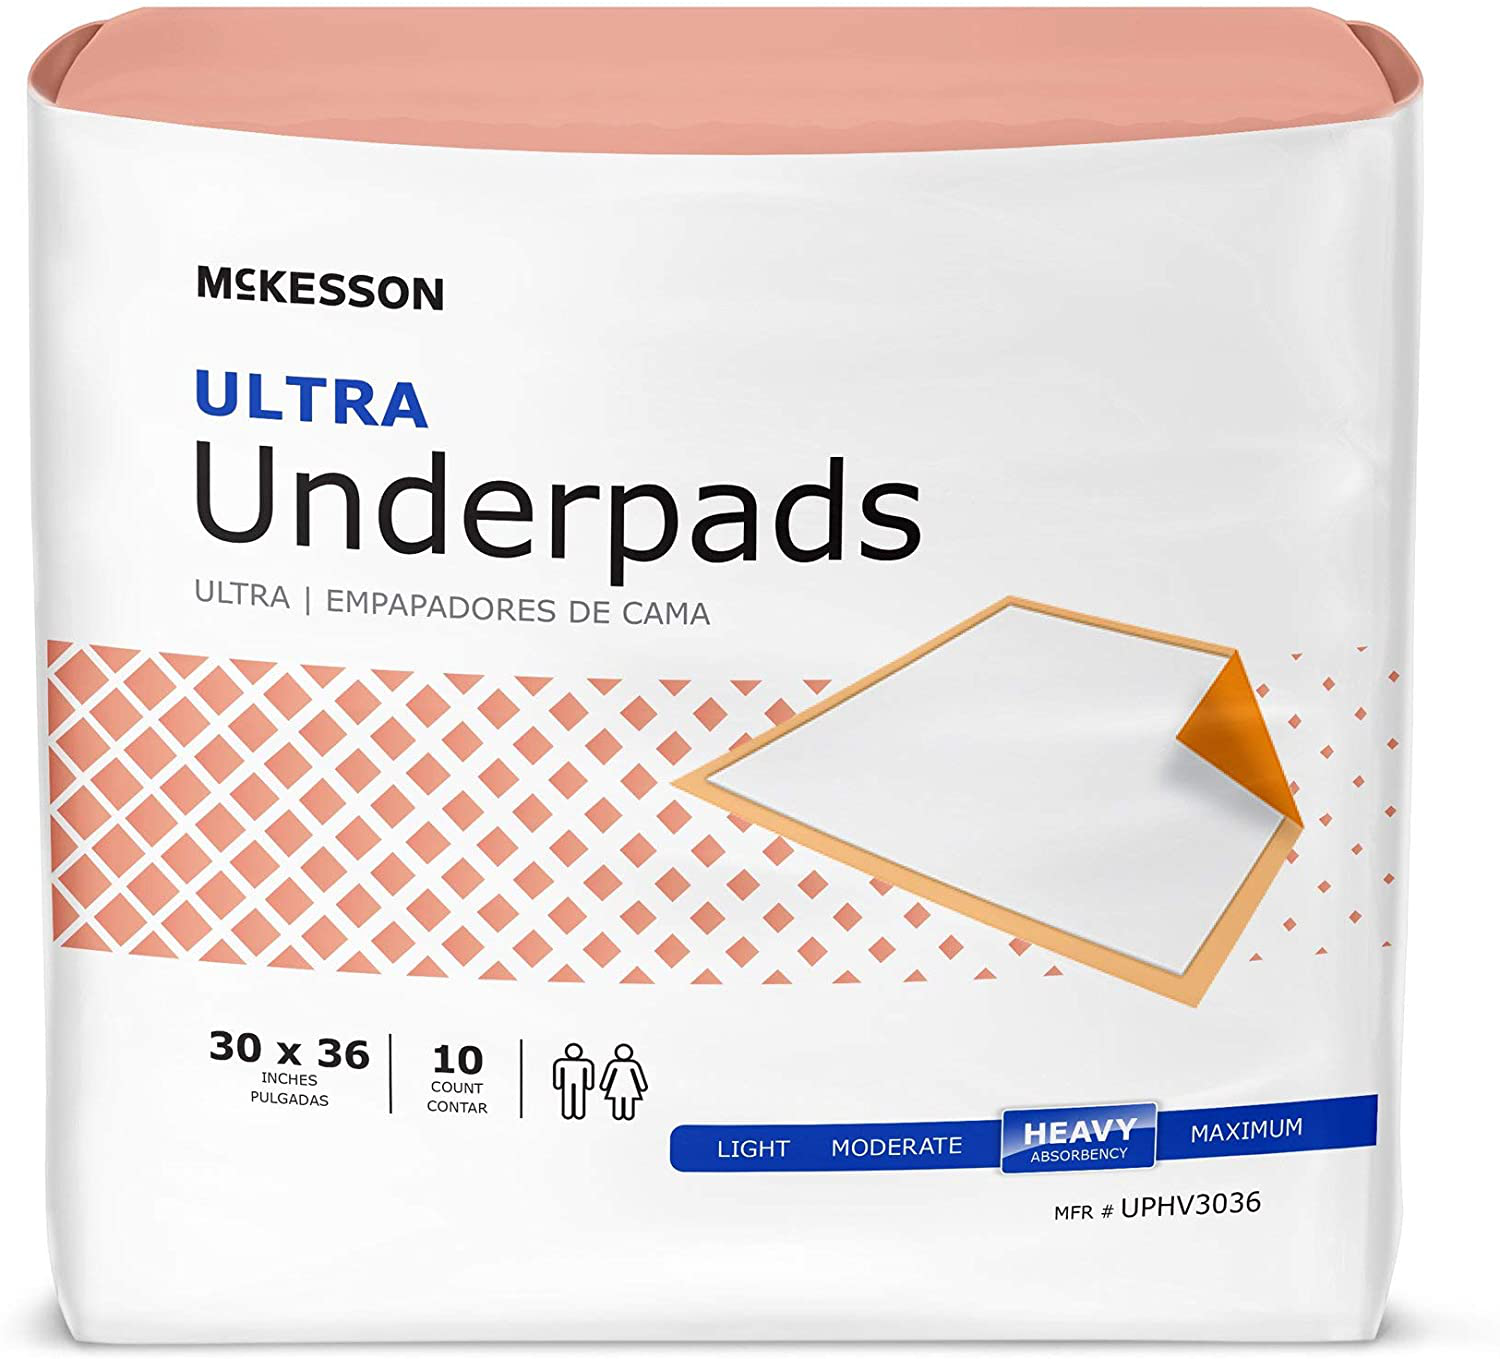 Mckesson UPHV3036 Staydry Ultra Underpads, 30" X 36" (Pack of 100)